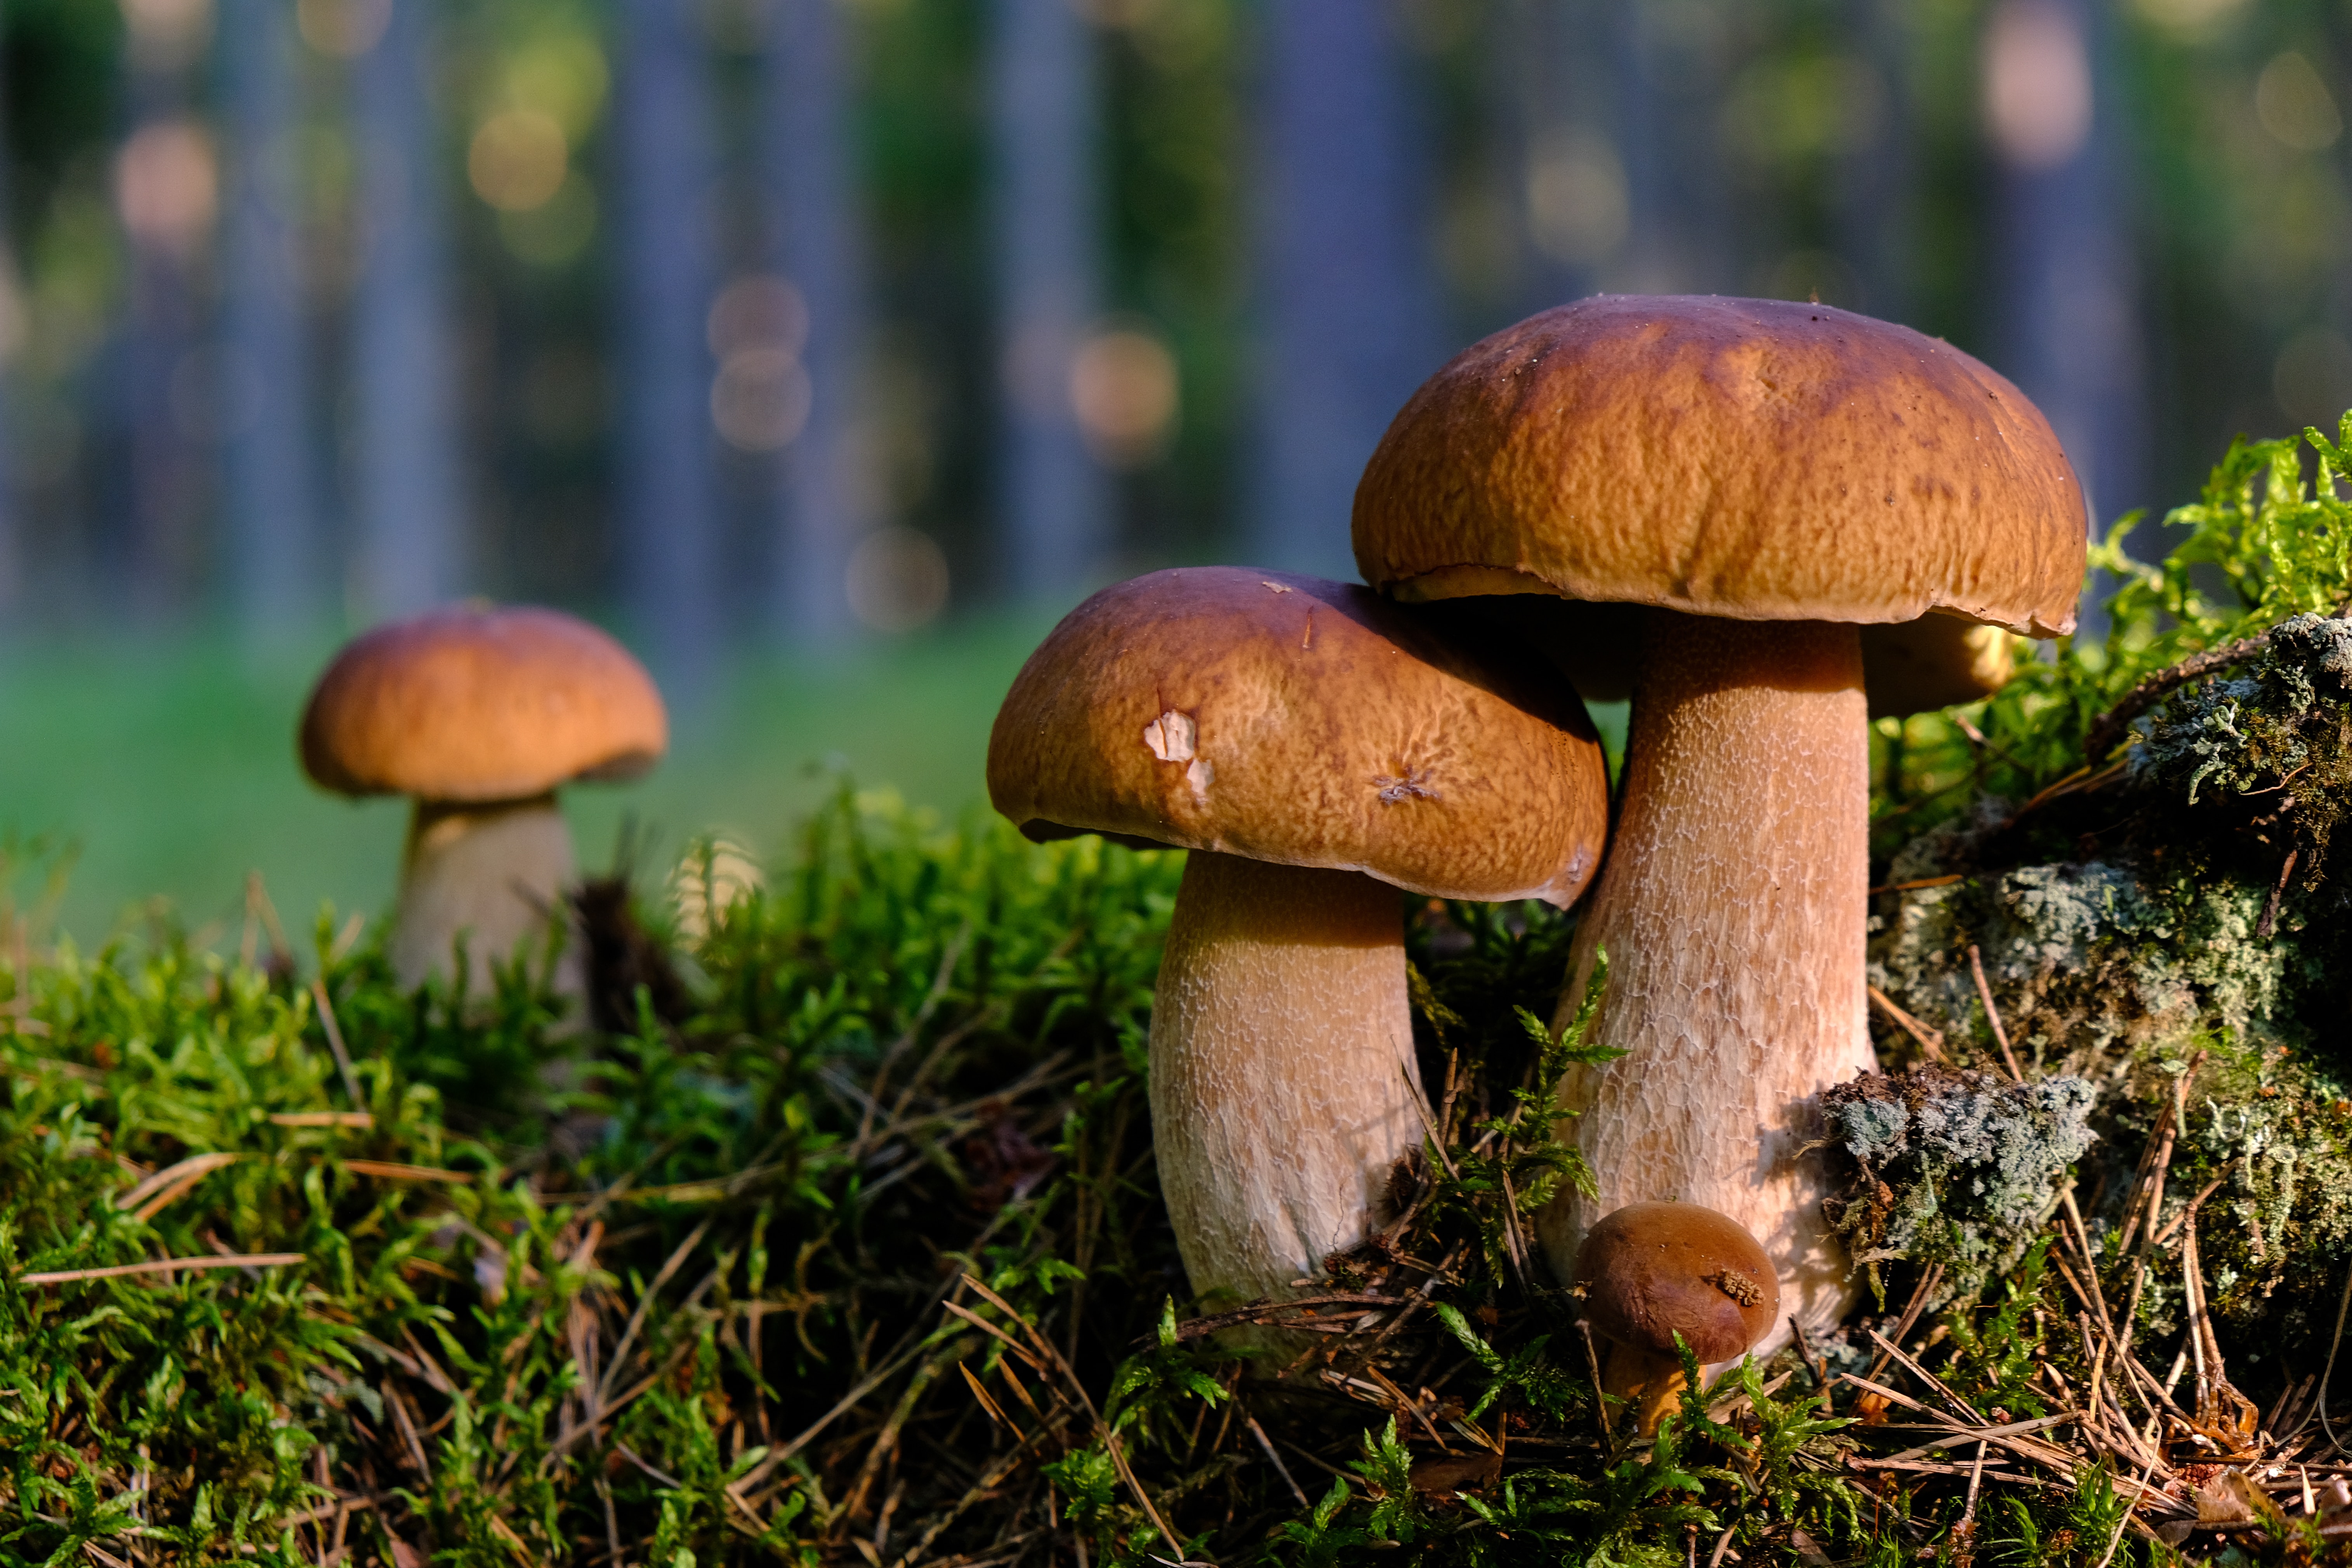 Mushroom supplements for overall health